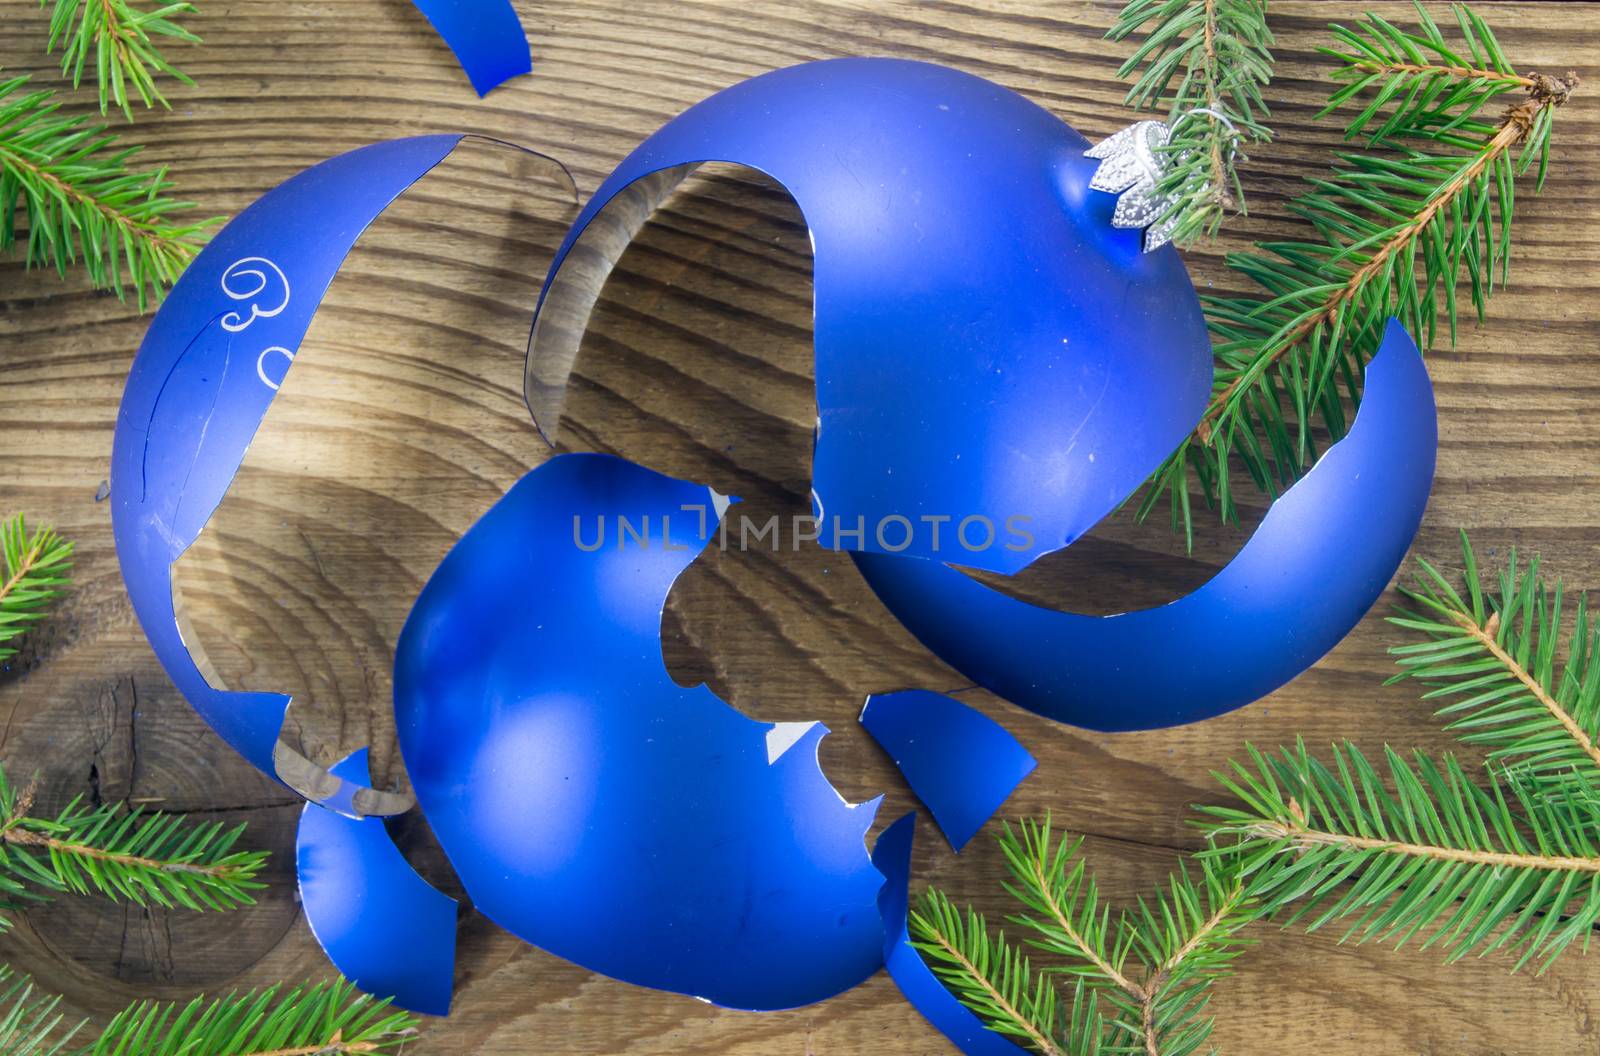 Broken Christmas Toy on wooden background. For your commercial and editorial use